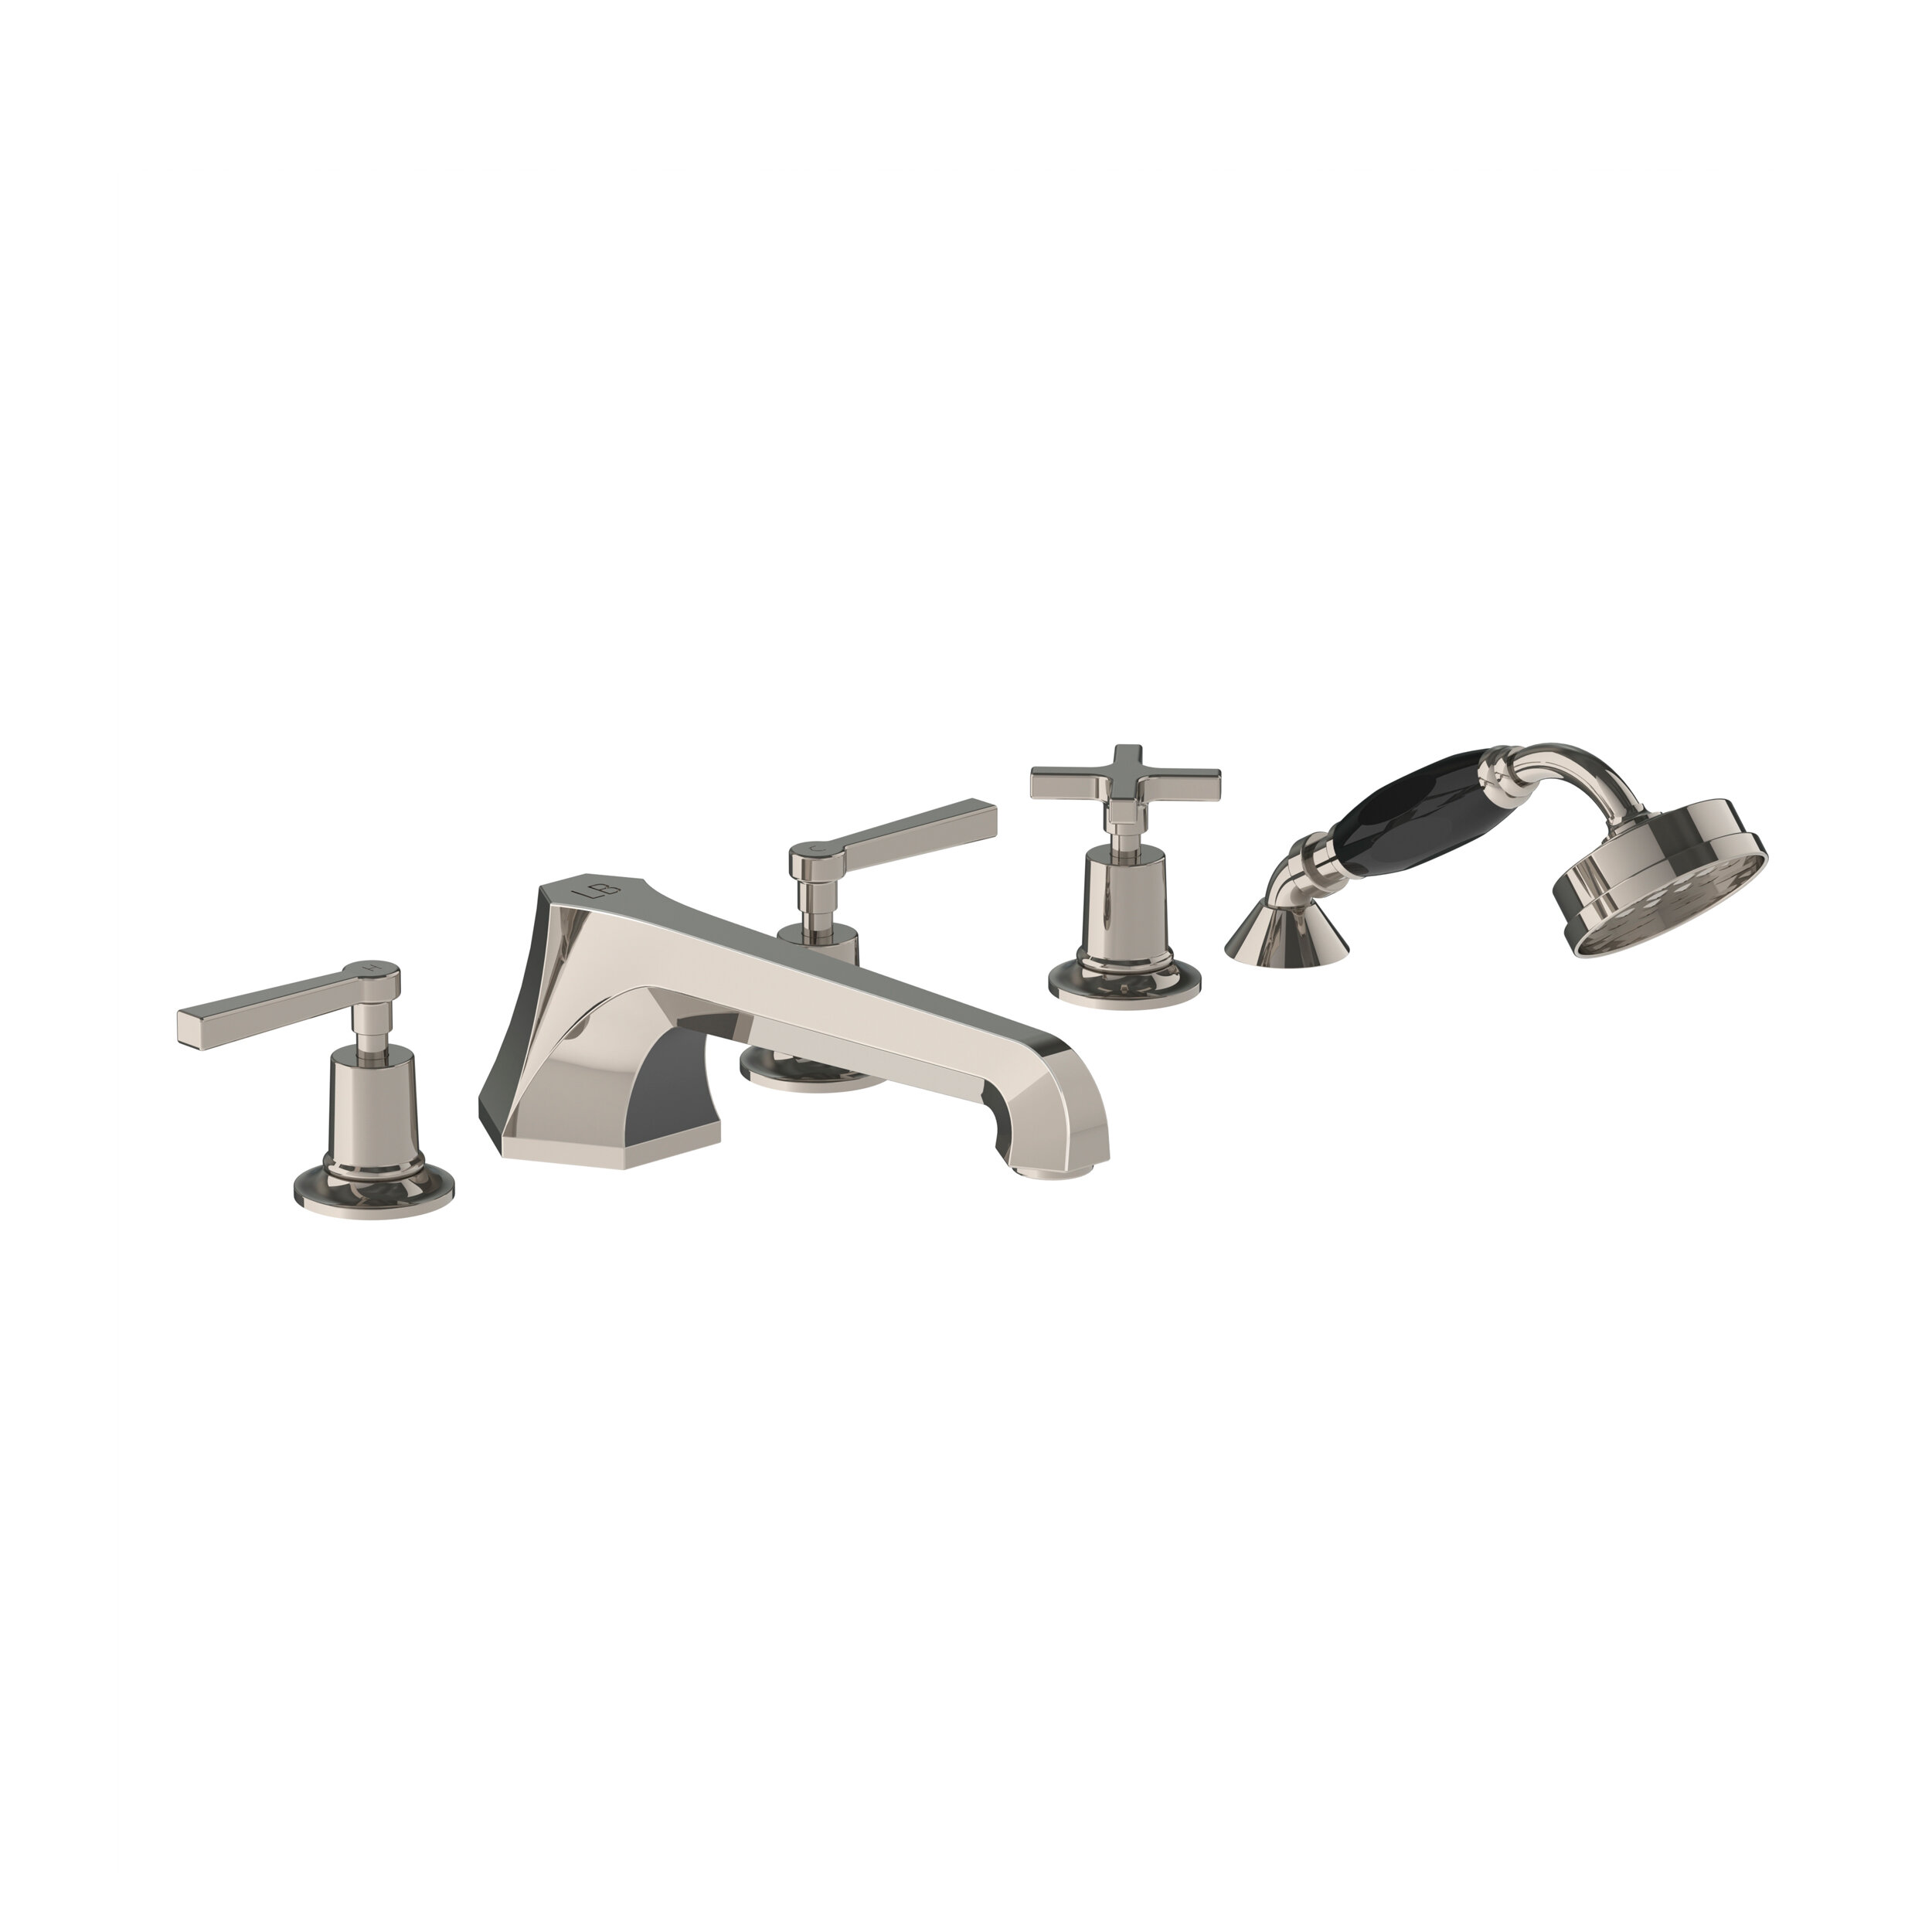 ML 1260 Mackintosh five & levers, bath Europe) shower Brooks (UK & diverter hole Lefroy metal pull with set out —